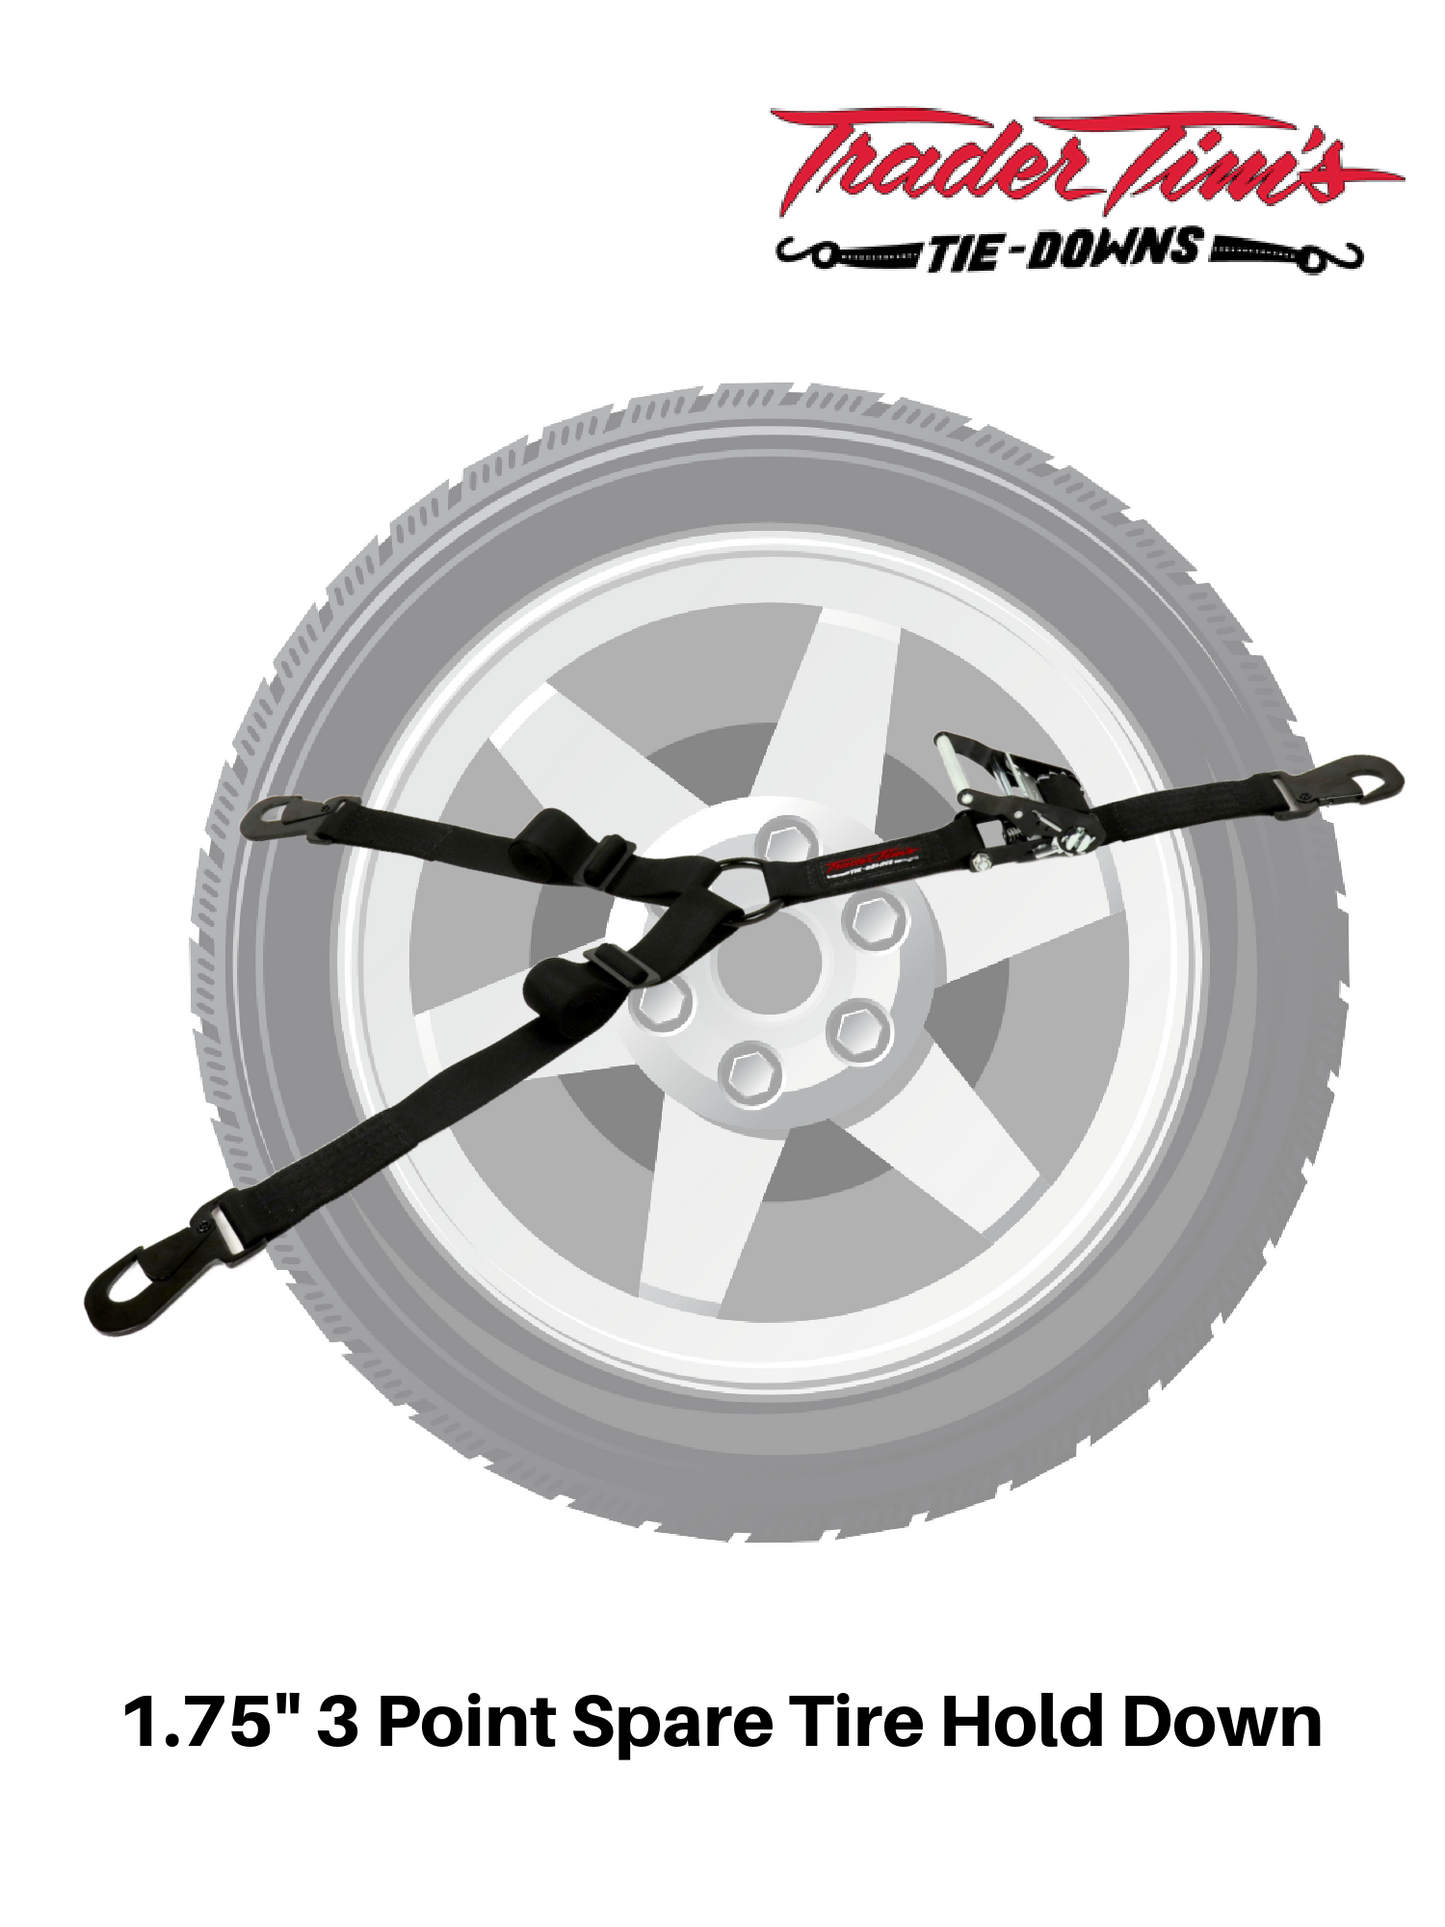 1.75" 3-Point Spare Tire Hold-Down - Adjustable Size